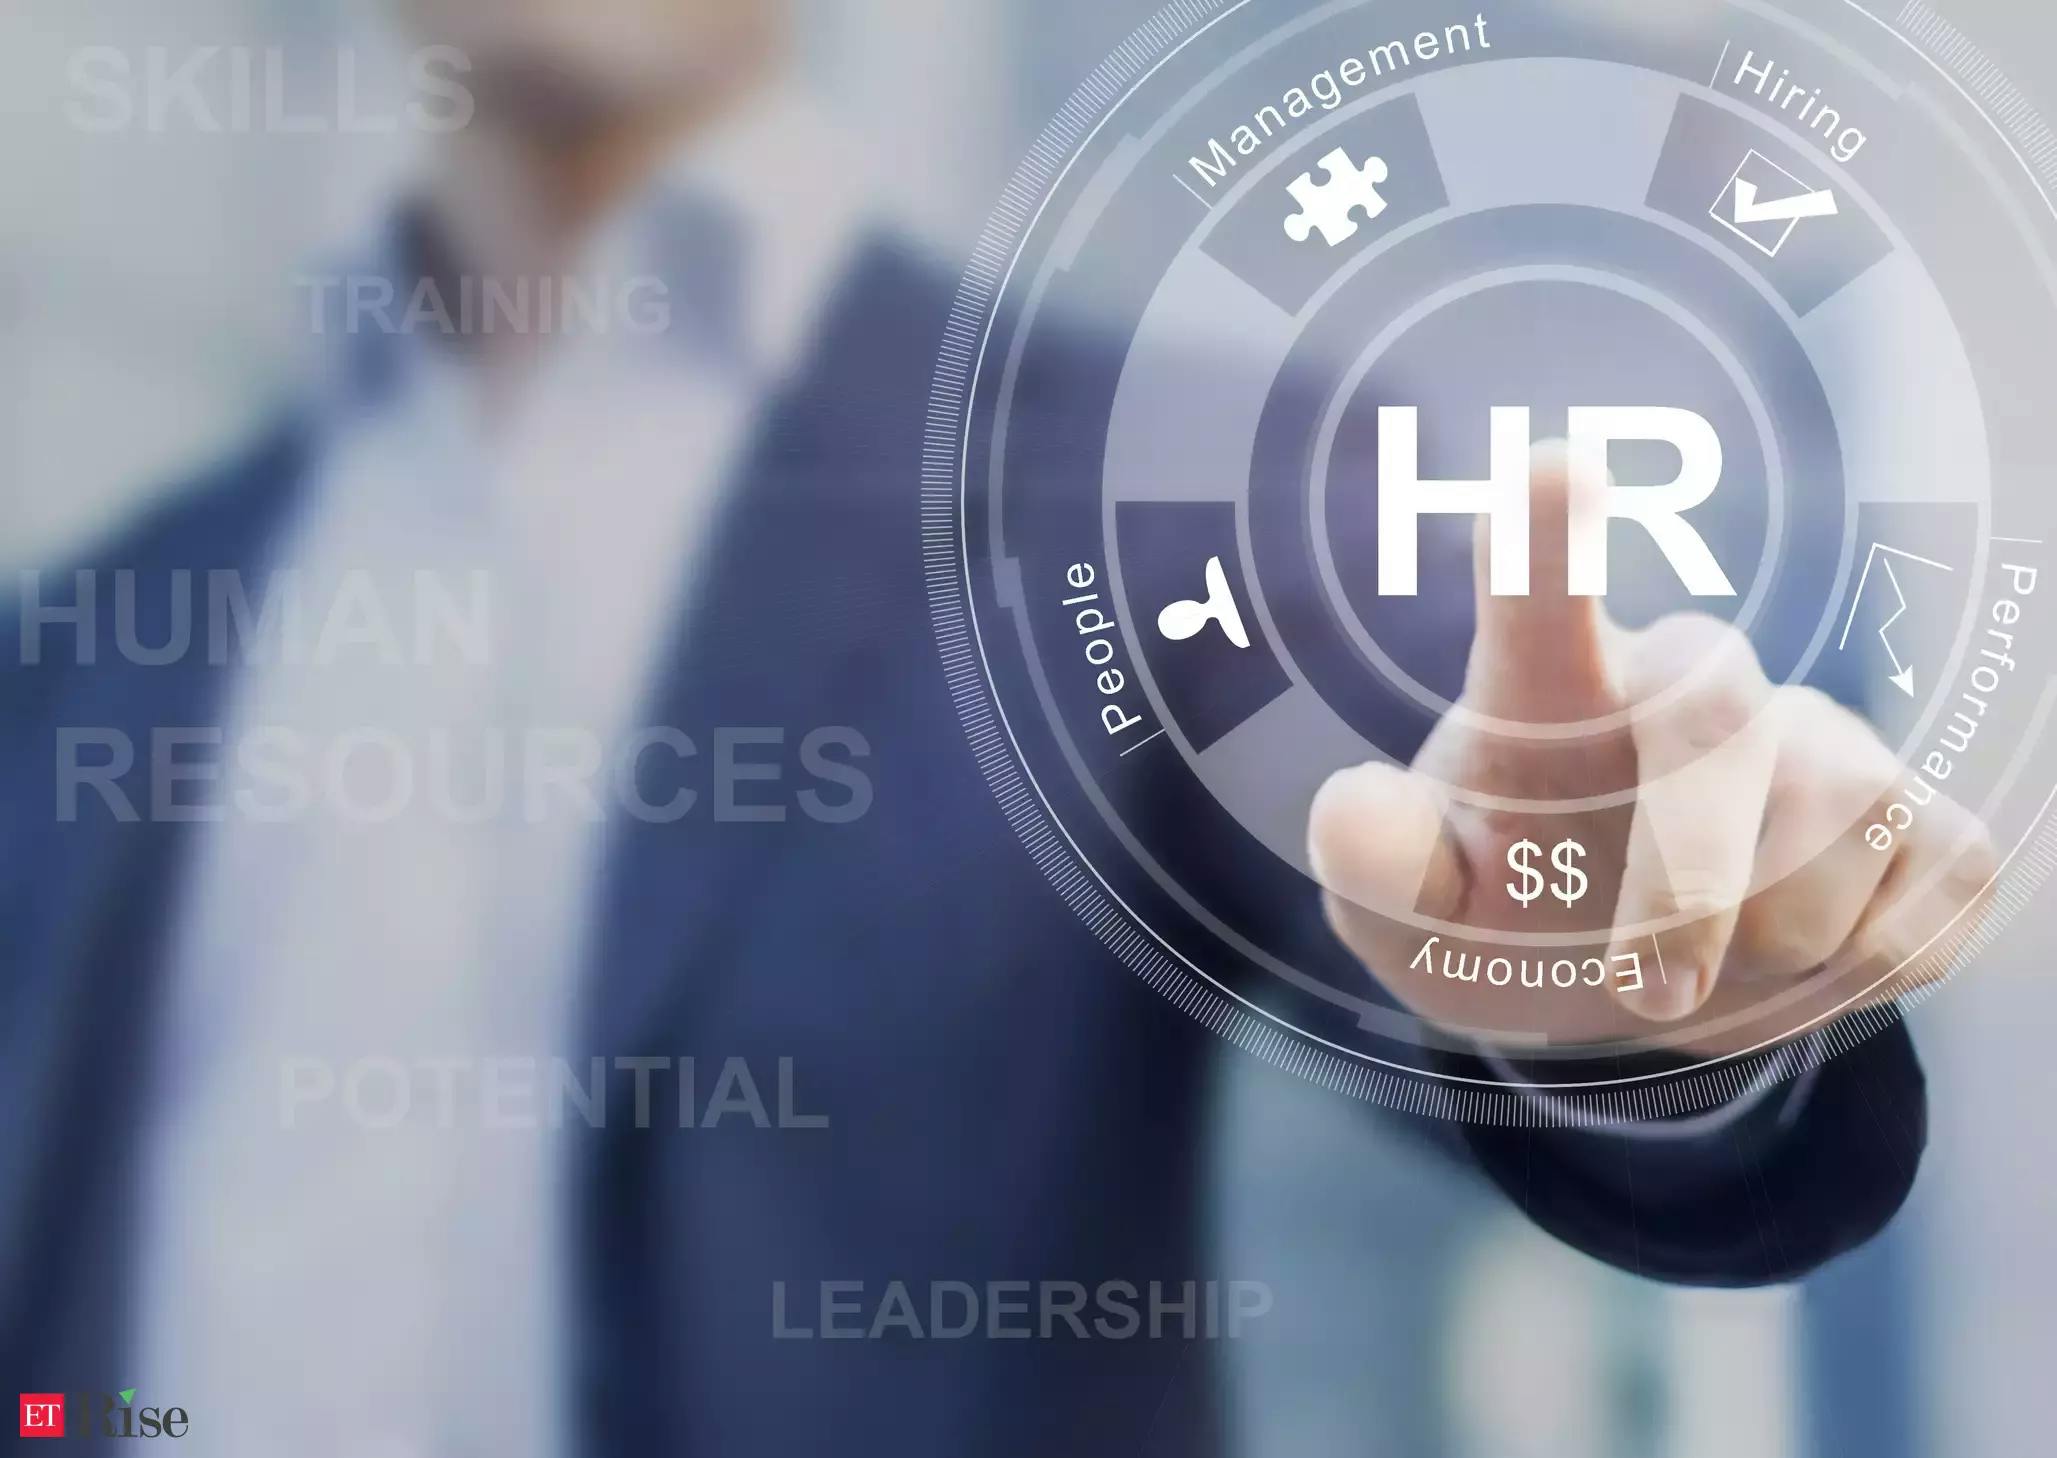 Human Resources Models Every HR Practitioner Should Know